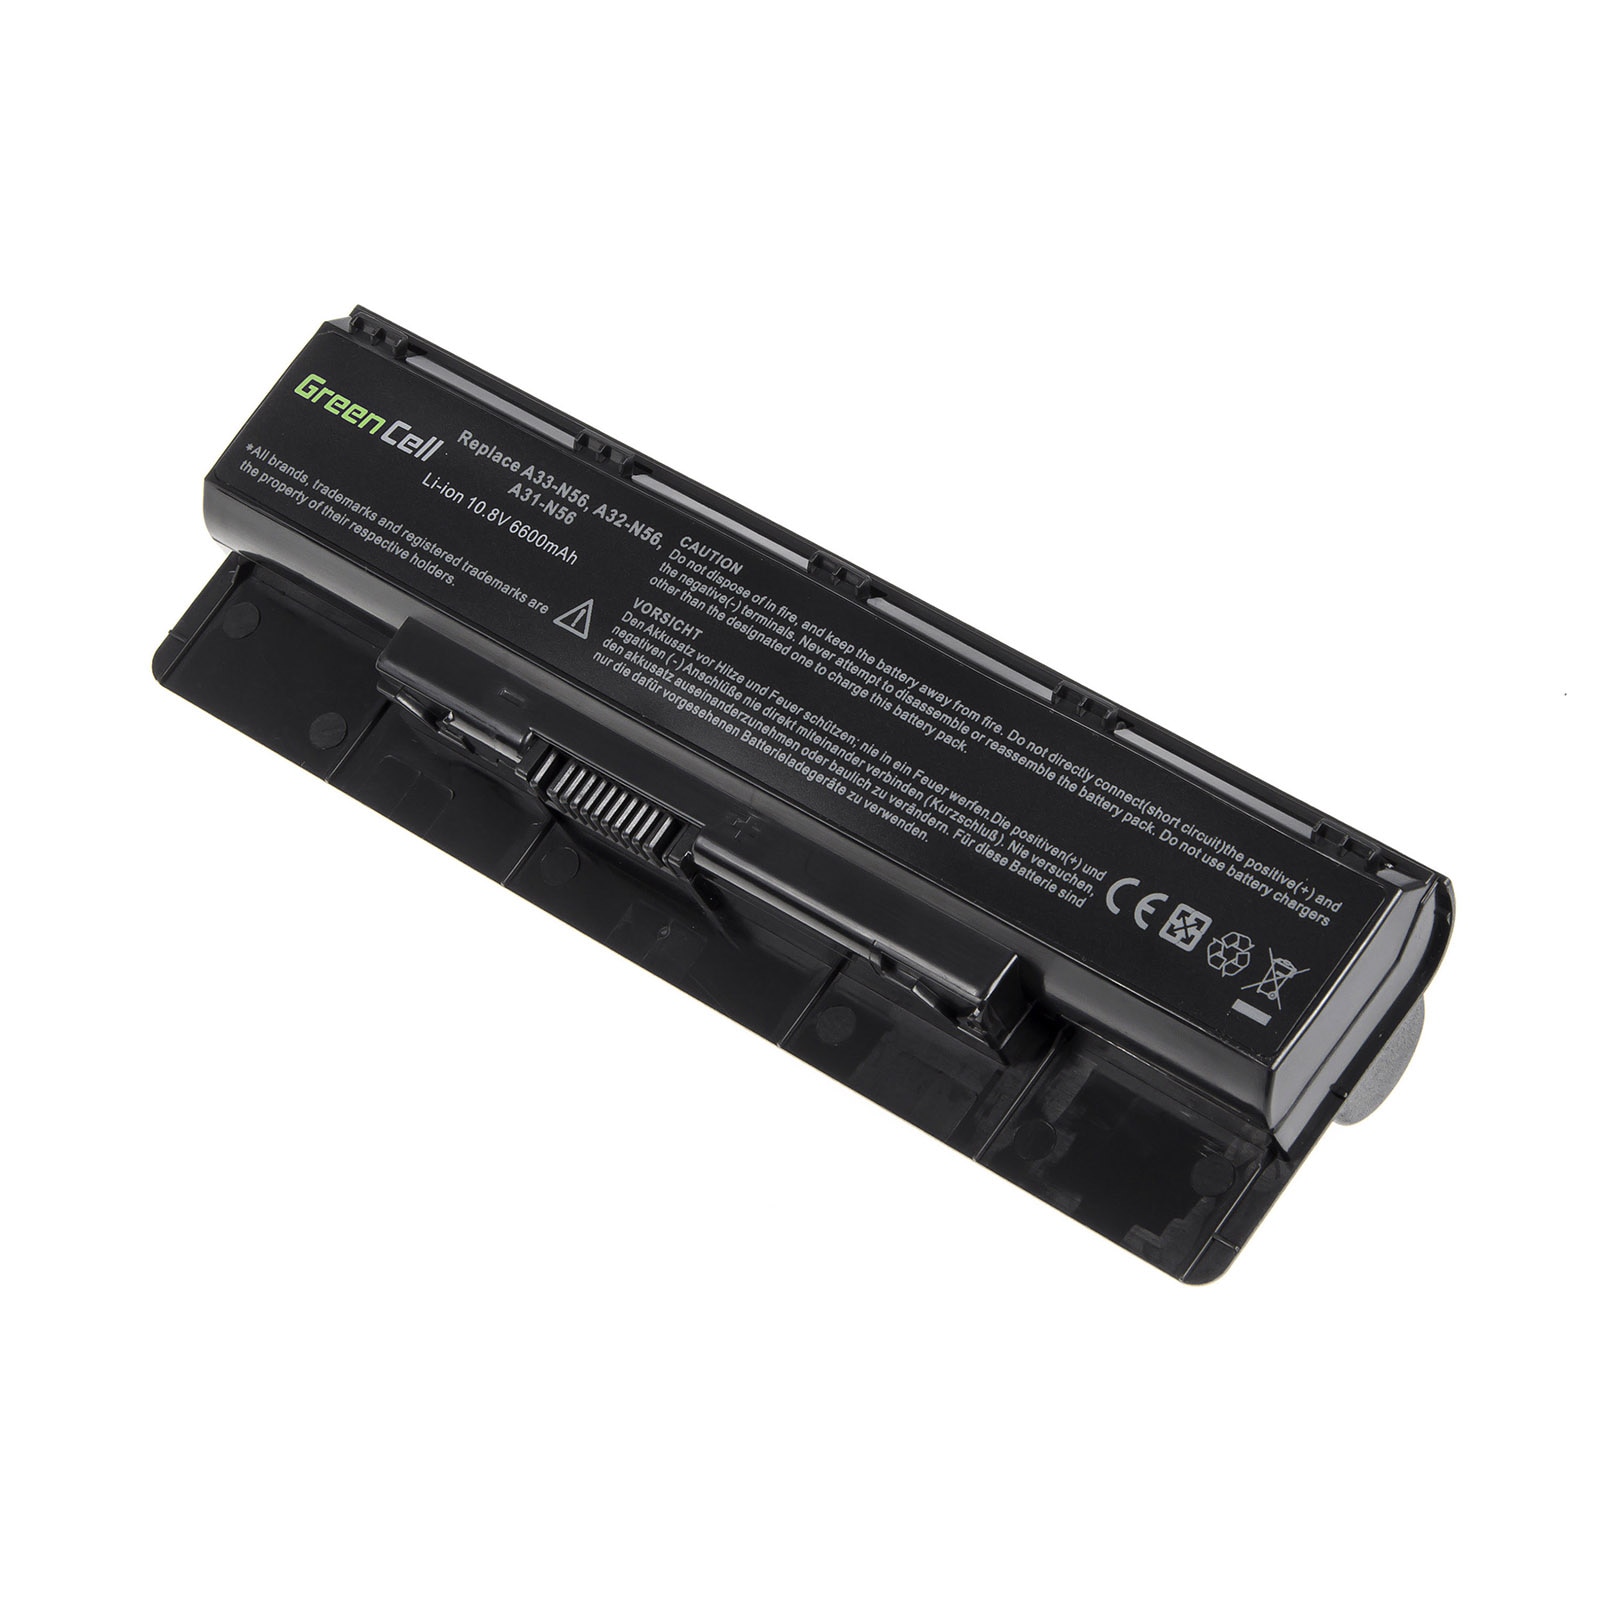 salvage betrayal dictator Baterie laptop A32-N56 pentru Asus N56 N56D N56DP N56JR N56V N56VJ N56VM  N56VZ N76 N76V N76VZ acumulator marca Green Cell - eMAG.ro